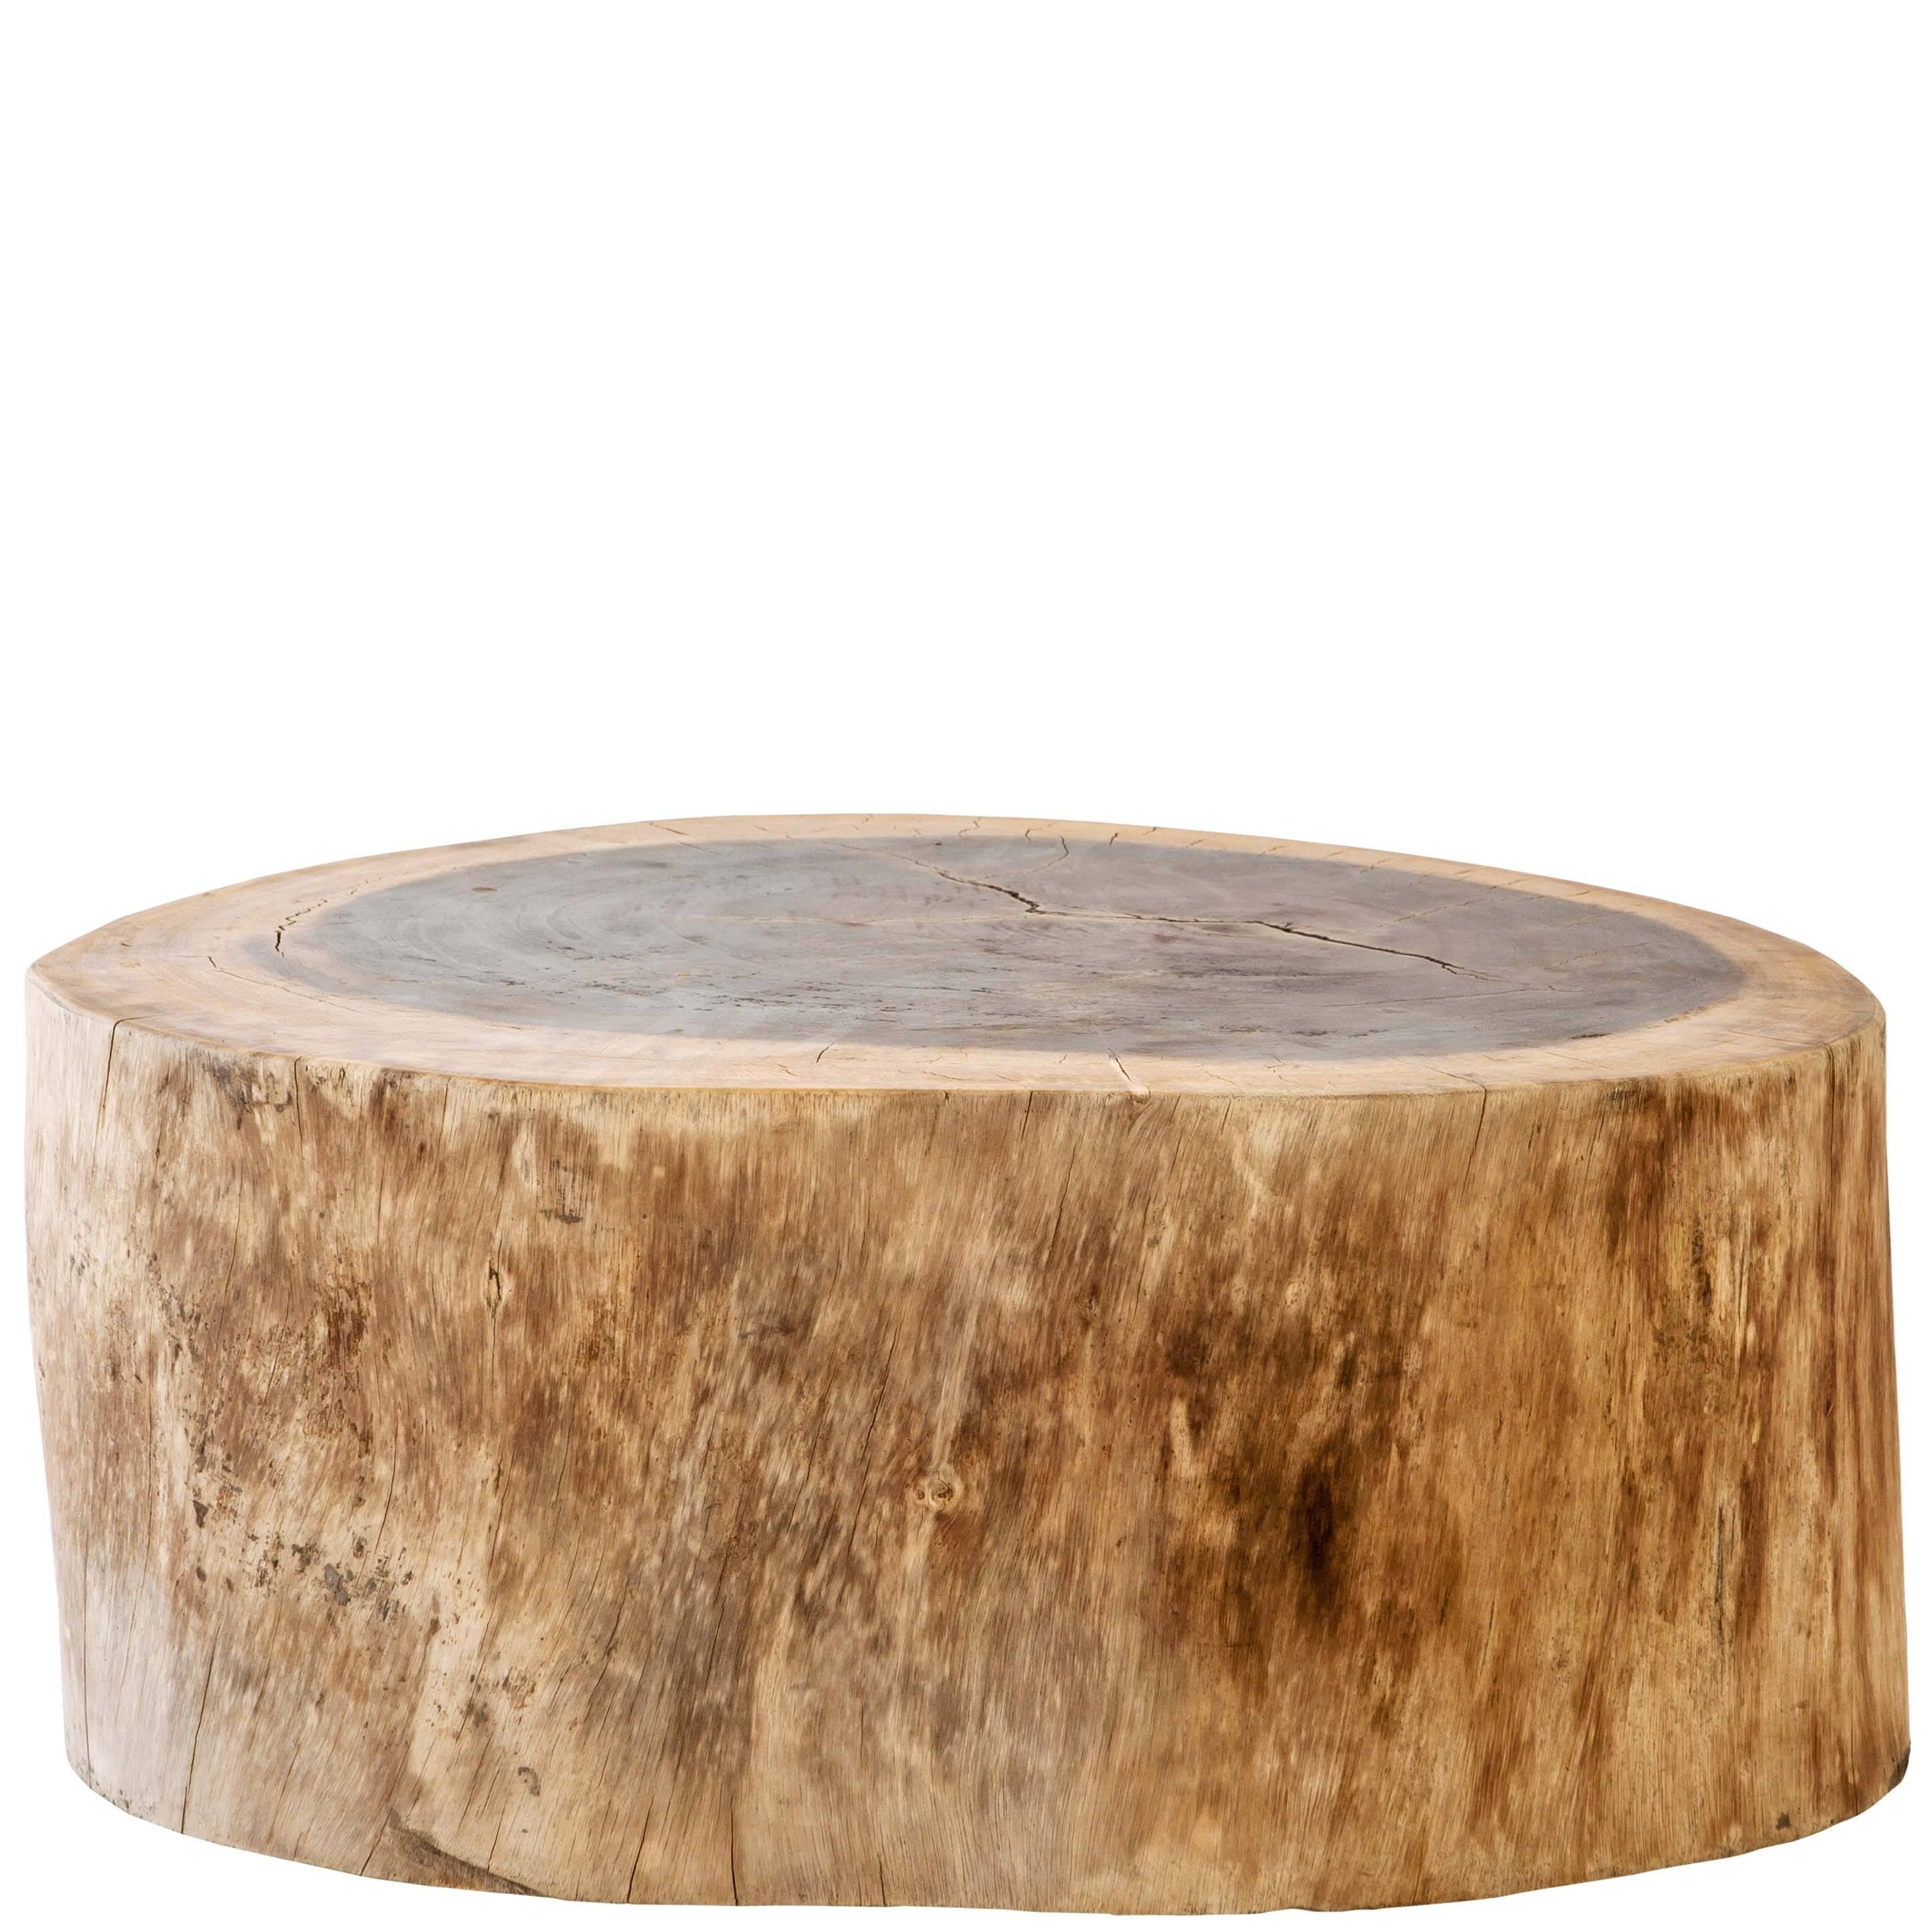 Munggur Tree Trunk Coffee Table – Large For Sale | Weylandts South Inside Tree Trunk Coffee Table (View 15 of 15)